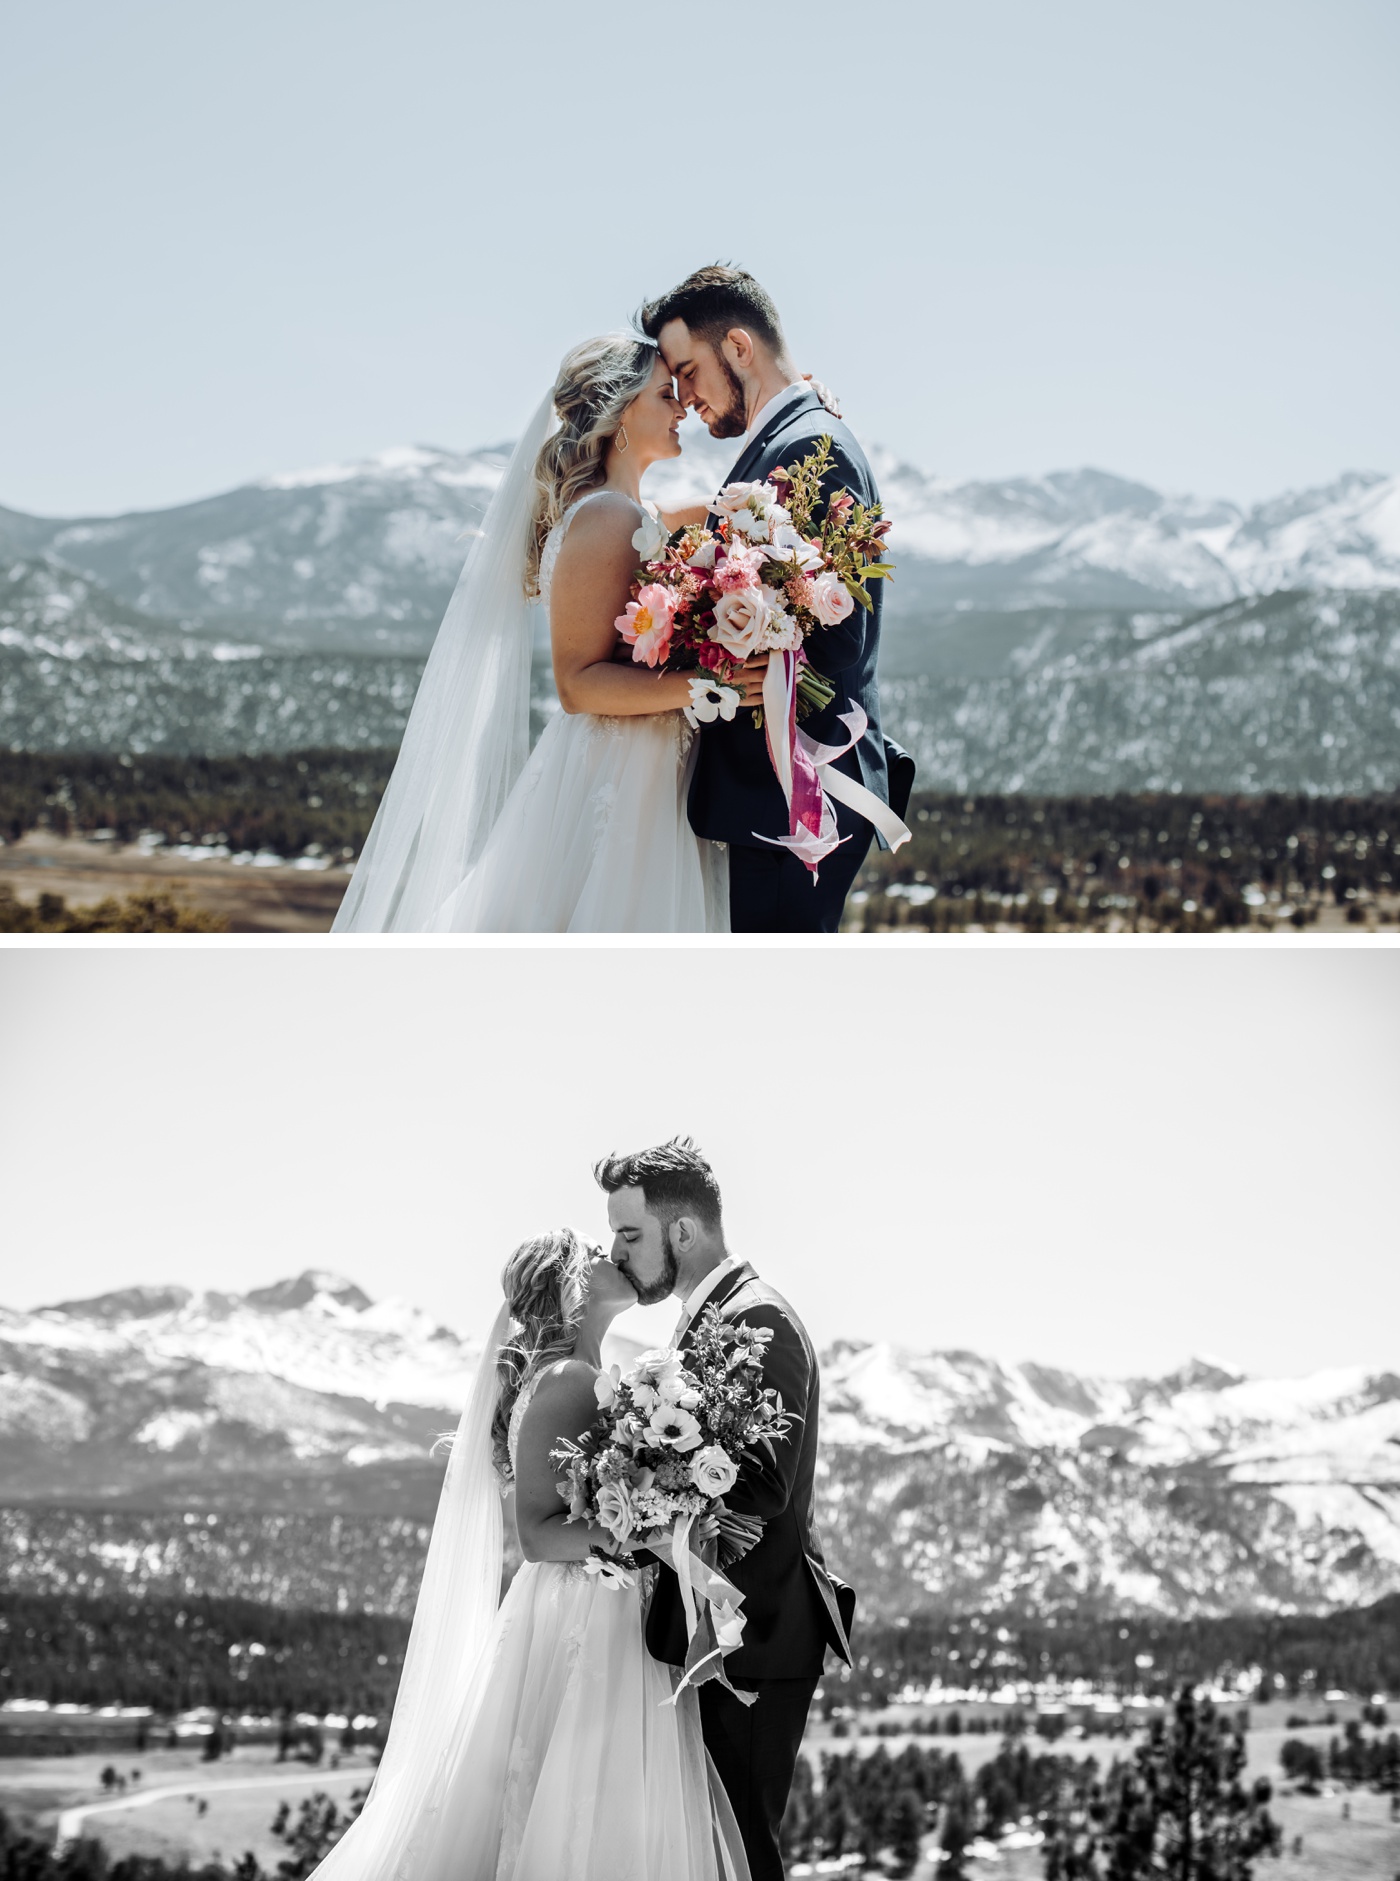 What to know about getting married in Estes Park